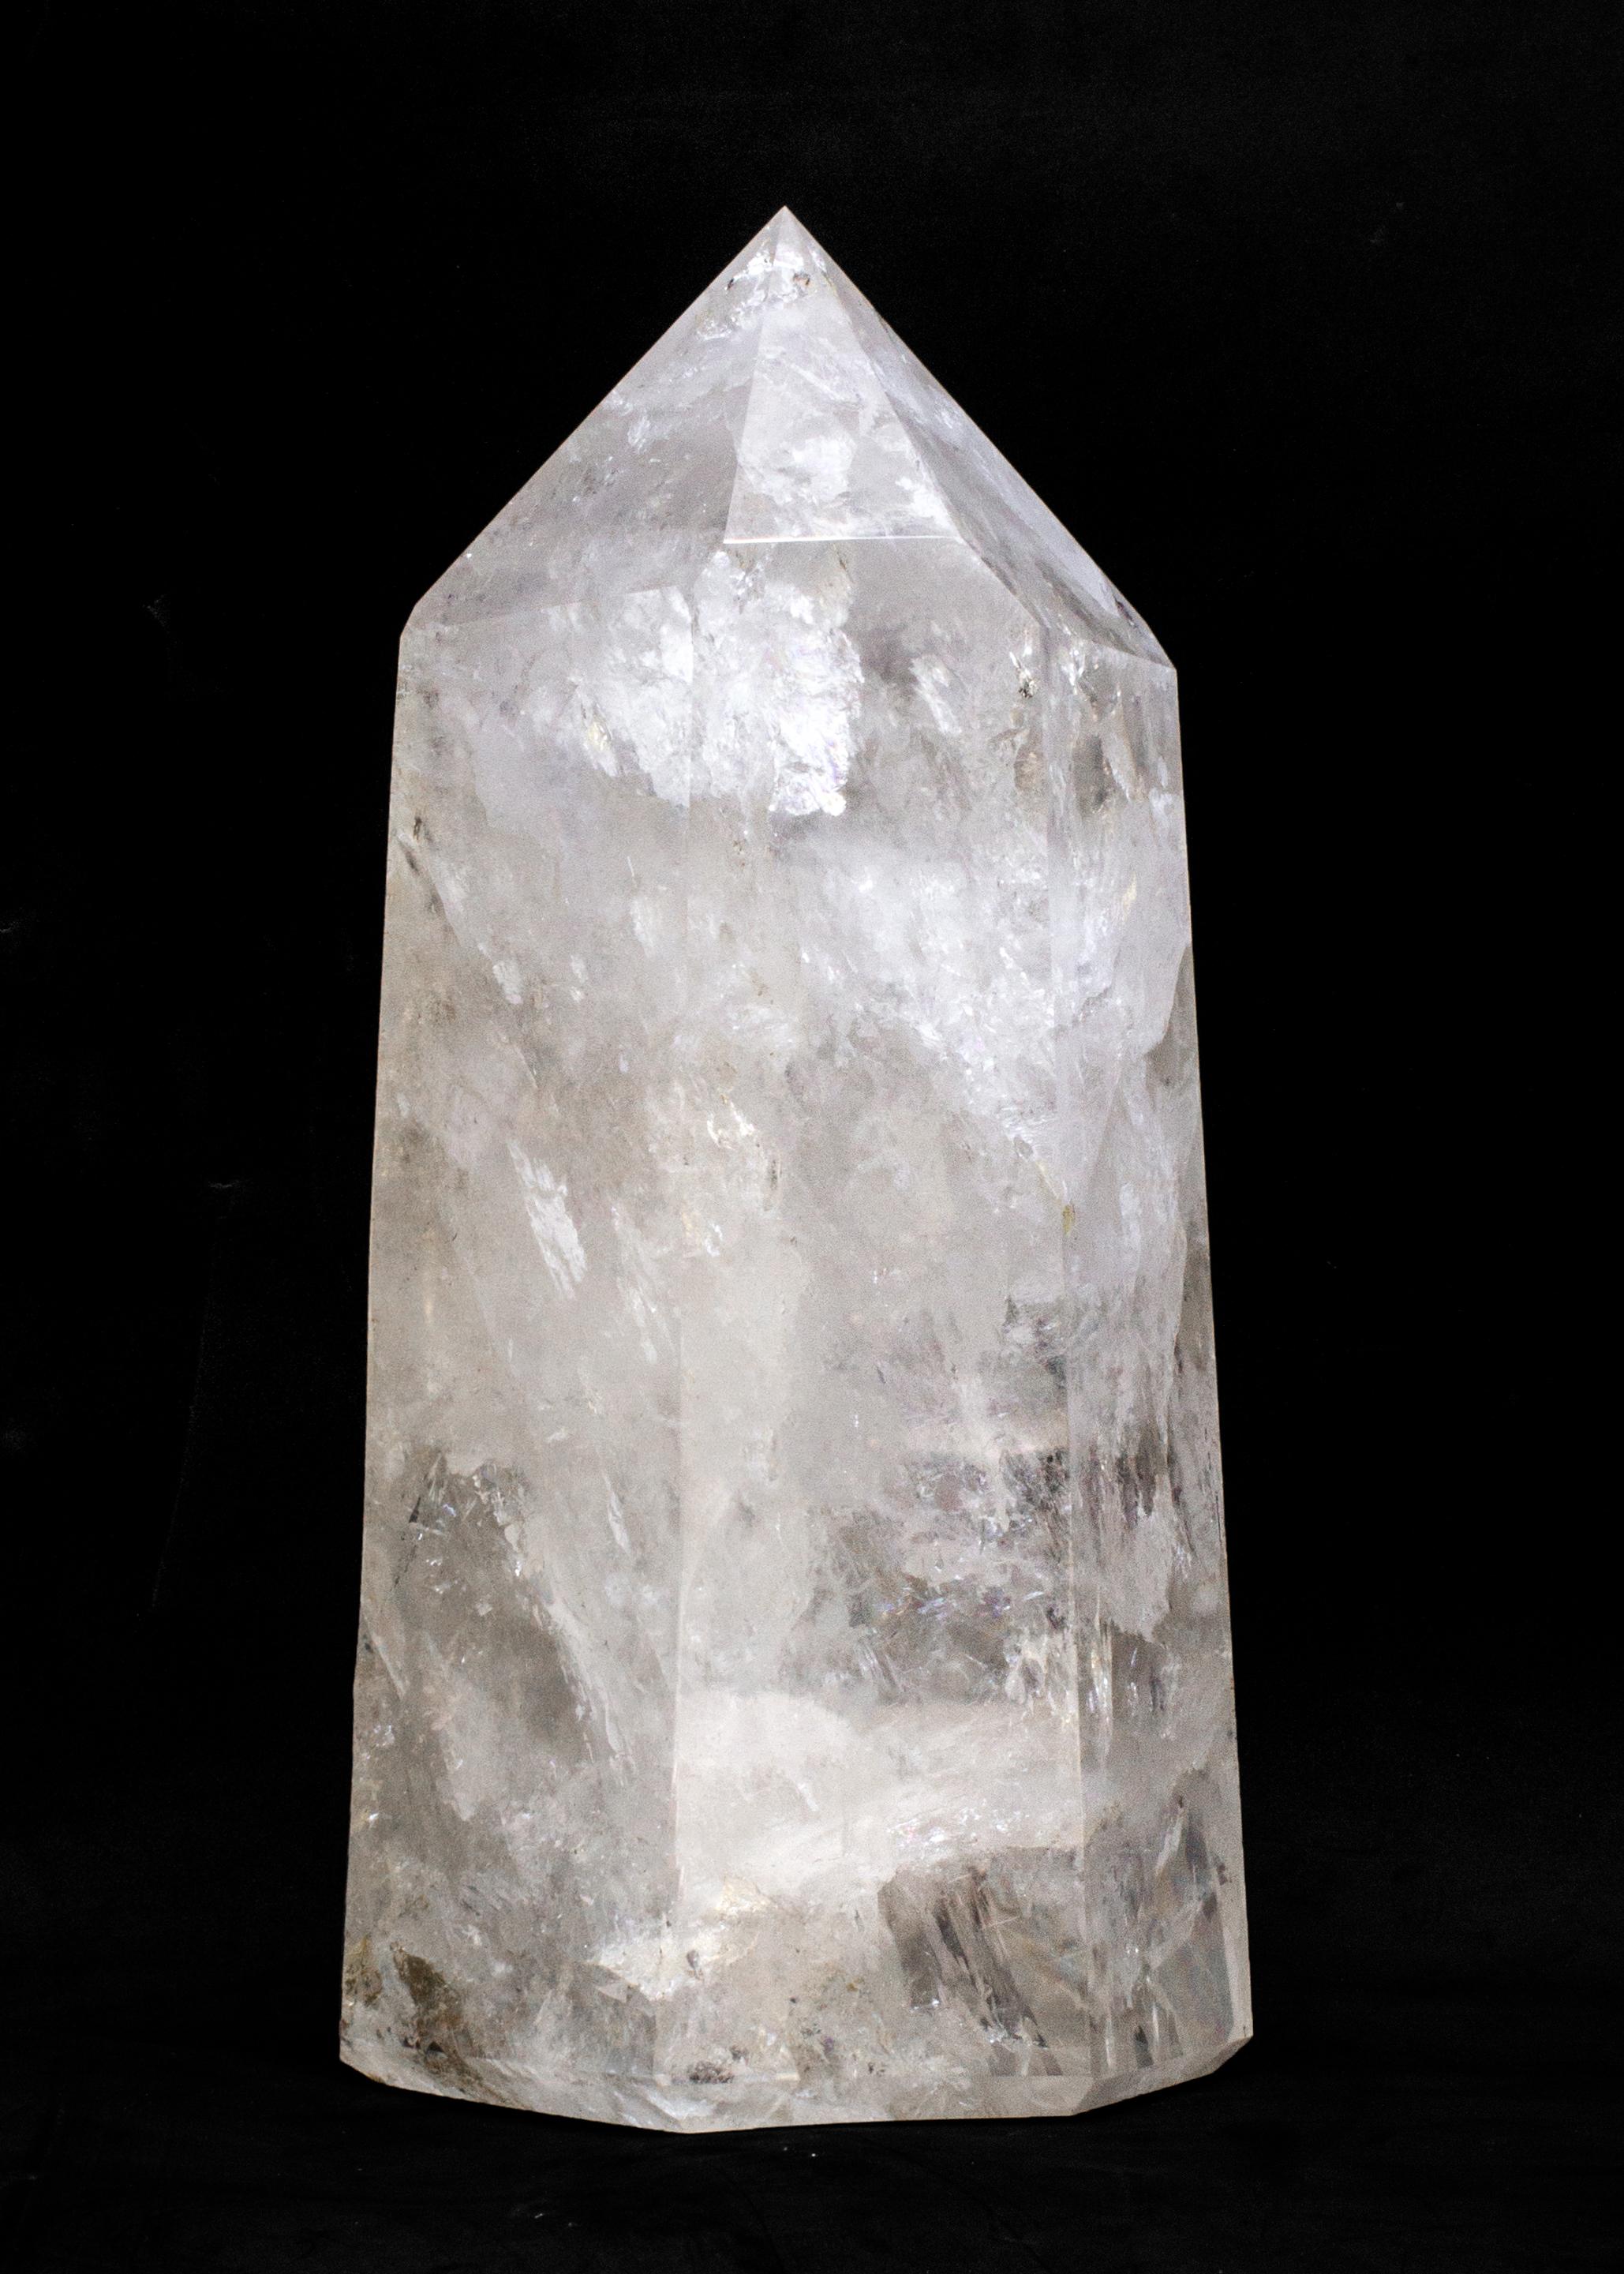 Polished crystal quartz obelisk point.

The polished quartz crystal point is from Brazil. It is polished by hand and faceted to achieve the six-sided obelisk shape and it contains natural occlusions. It is very rare to find a crystal quartz point in